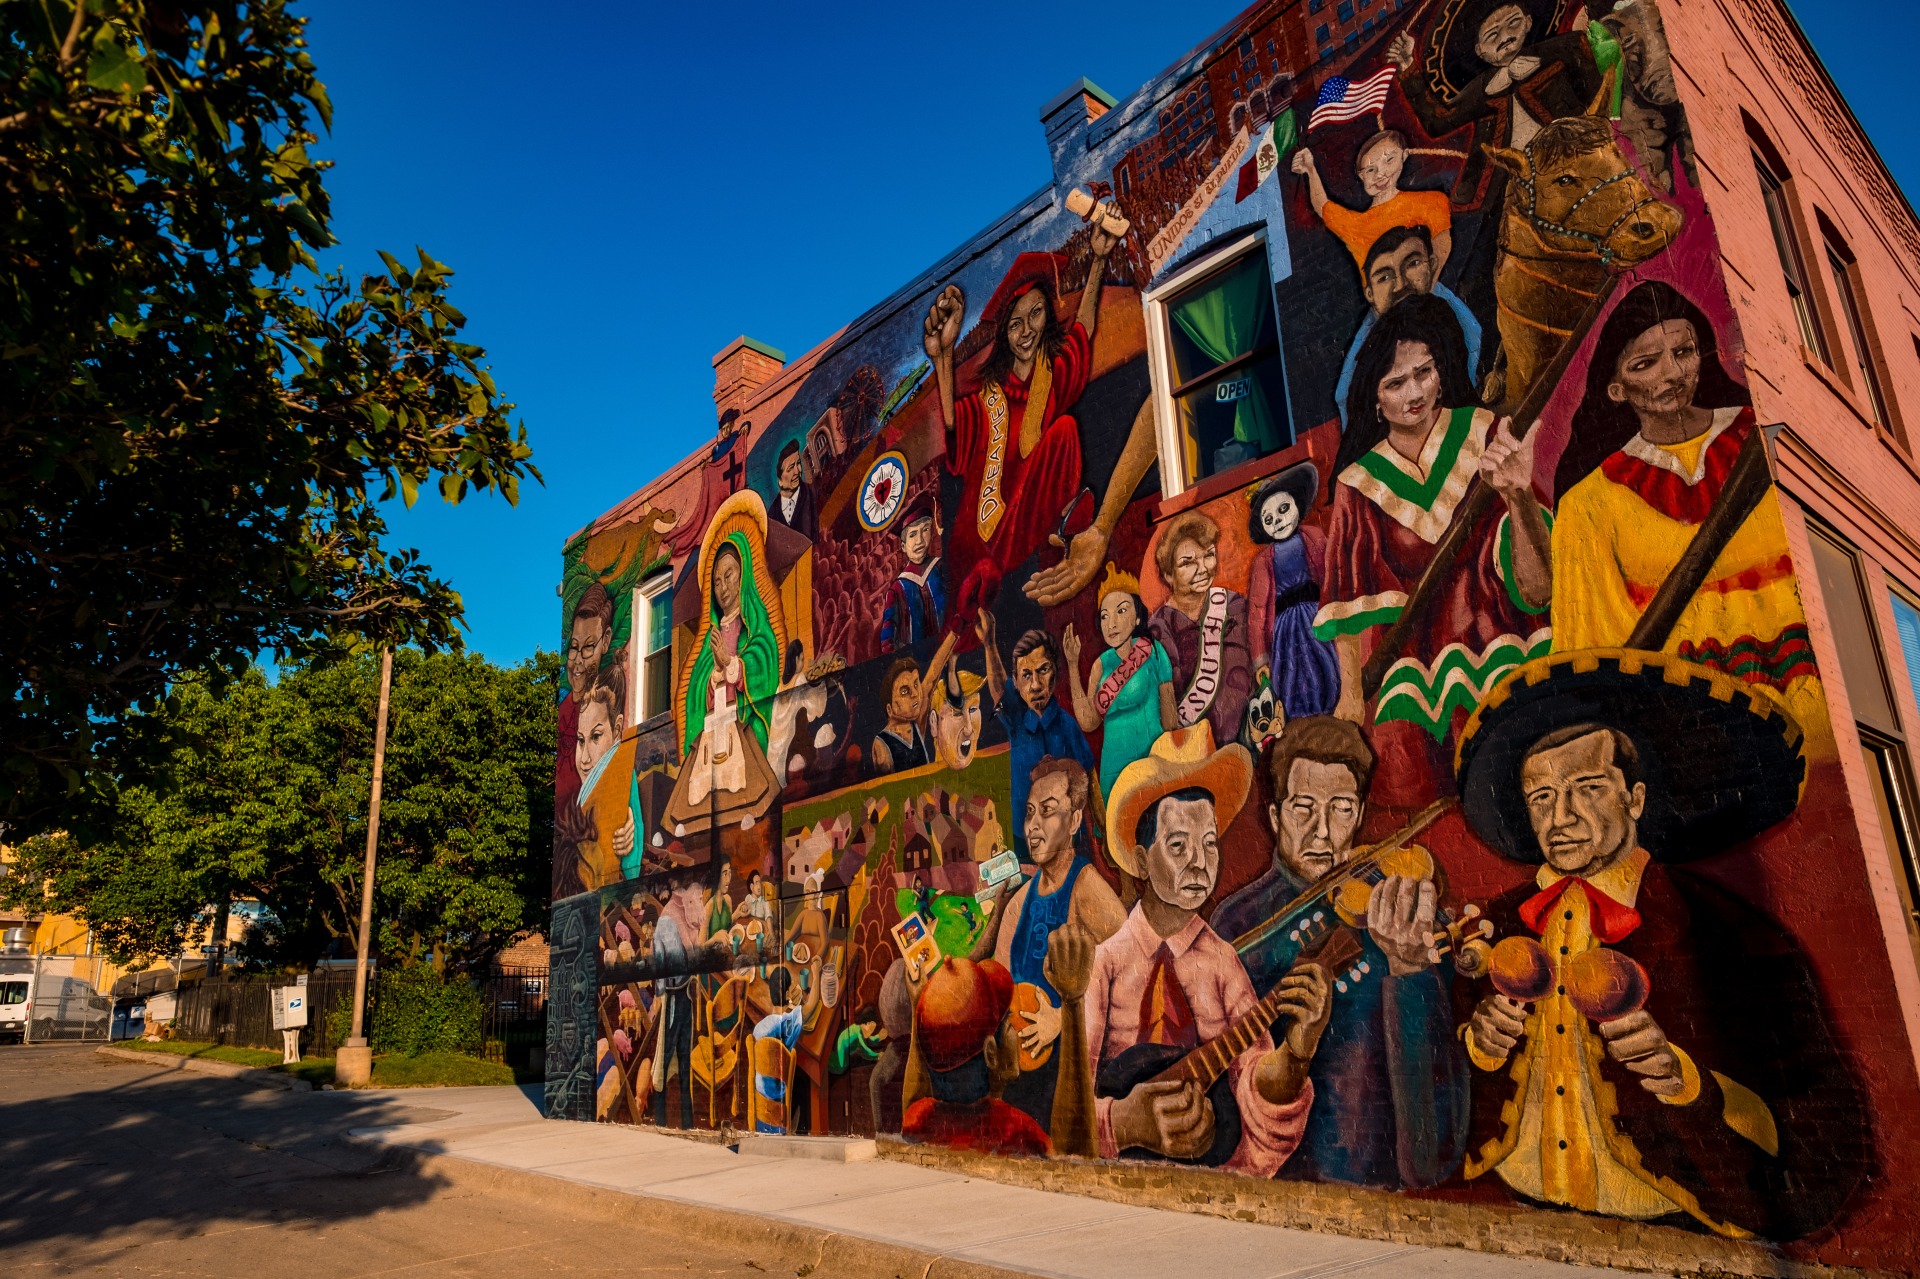 Bright and colorful mural in South Omaha, Nebraska